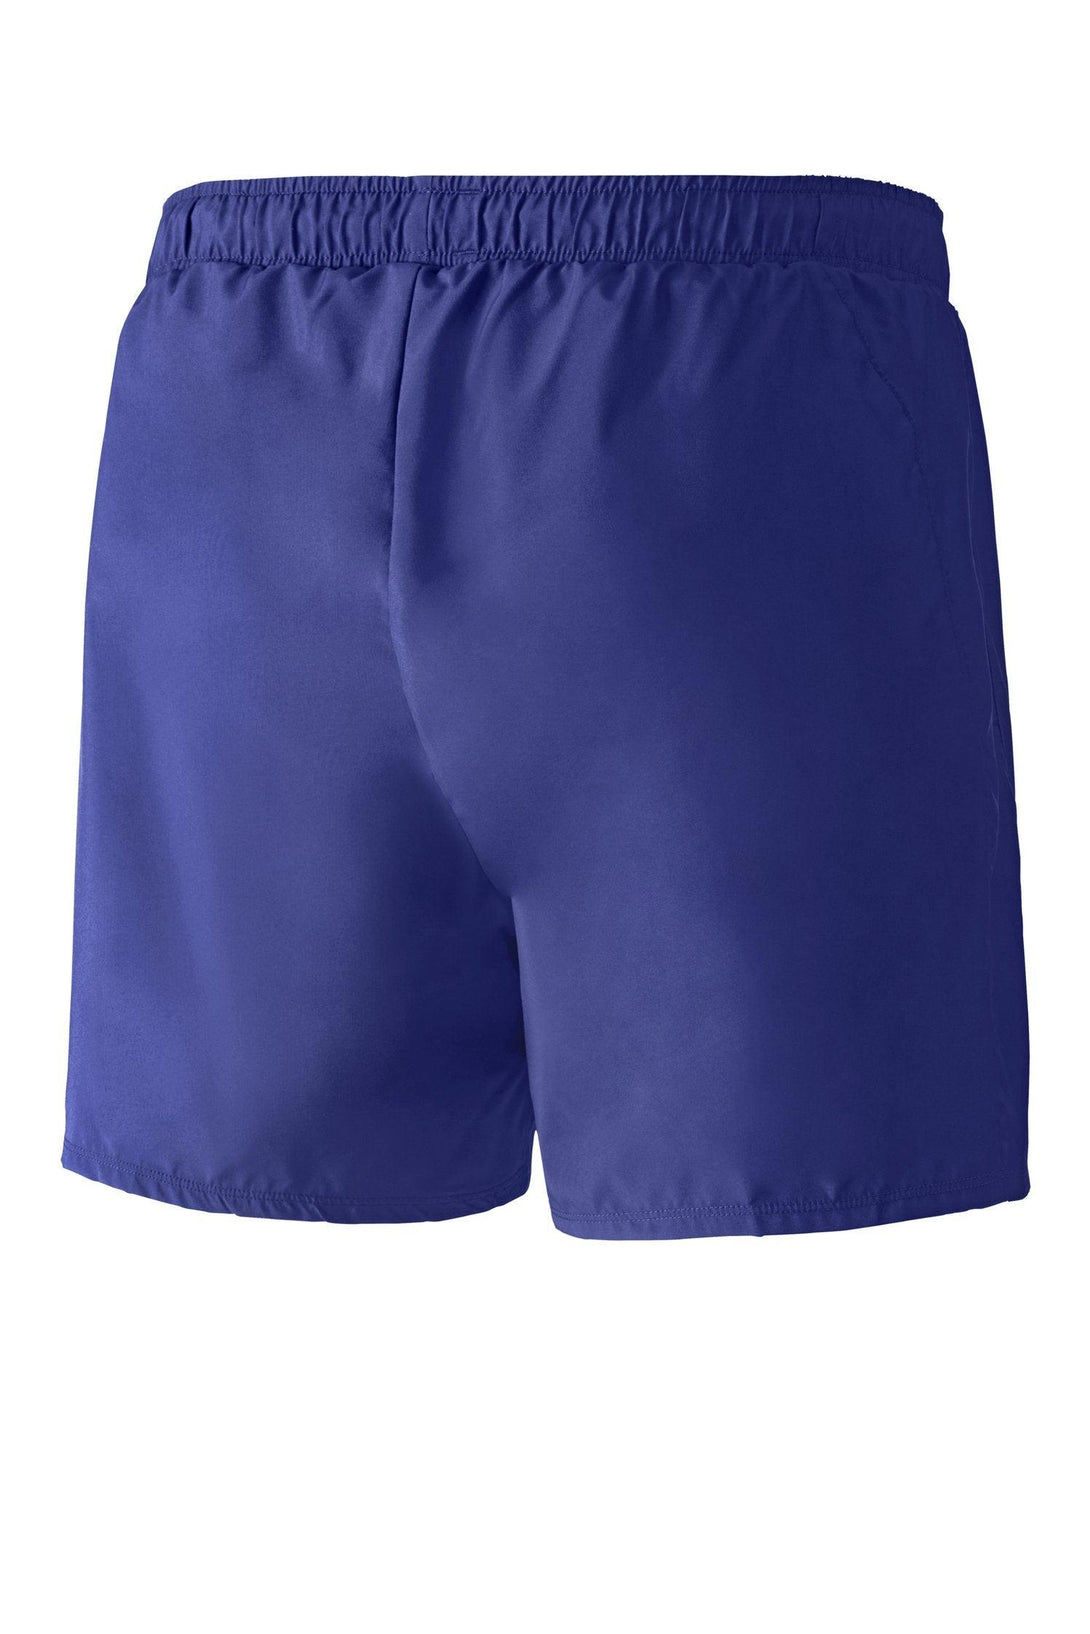 Rugby Heaven Mizuno Core Square 5.5 Shorts Mens - www.rugby-heaven.co.uk